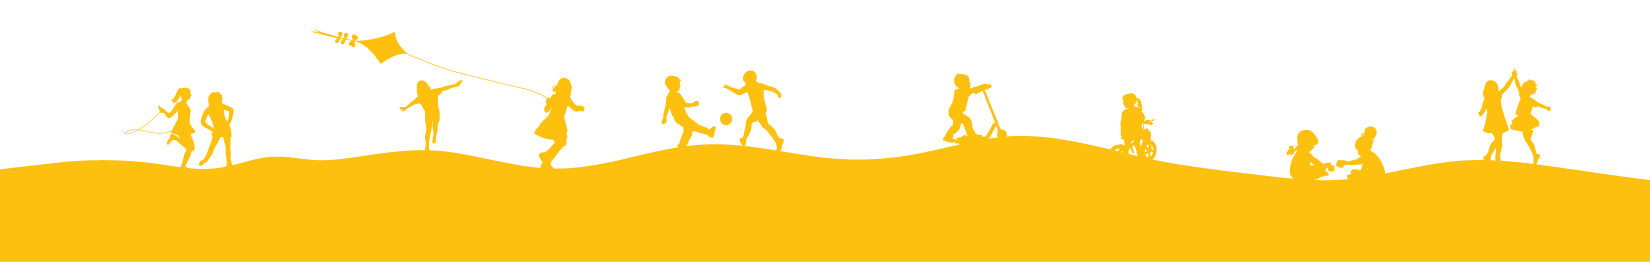 solid yellow vector image of soft hills with several children doing different activites